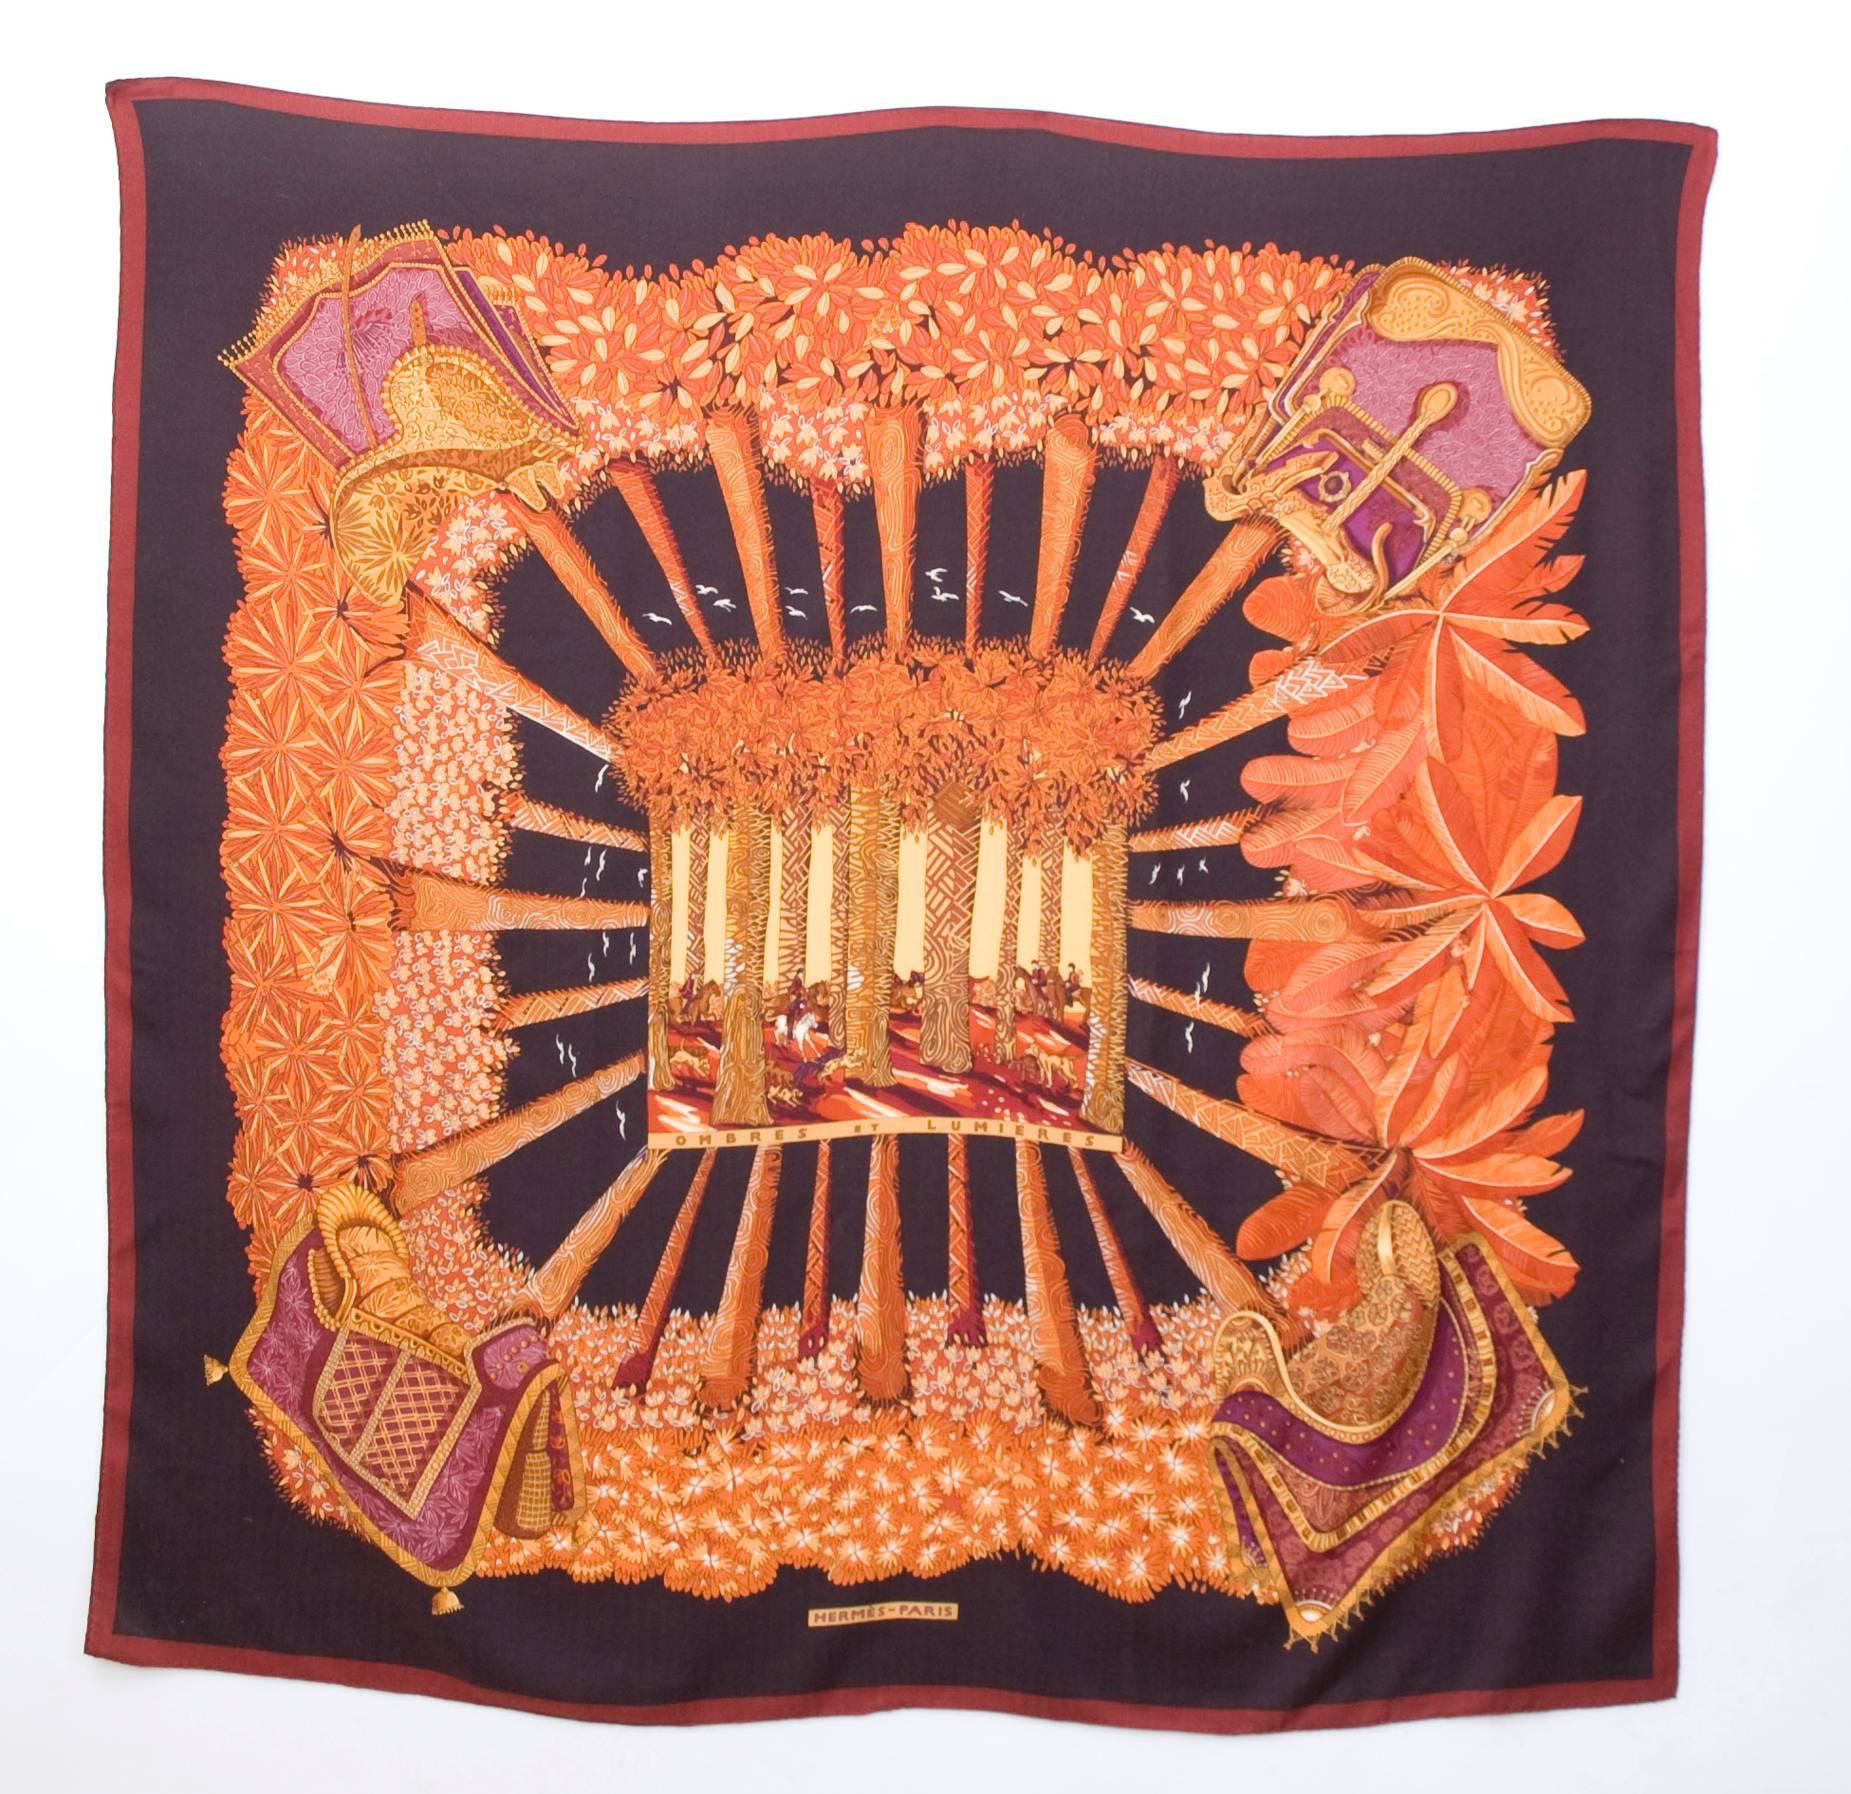 HERMES Ombres et Lumieres cashmere silk scarf in excellent condition and in original box. From 2001 designed by Annie Faivre features a beautiful design of lights and shadows among trees in beautiful autumn/winter colors.
XL size 135 cm x 135 cm